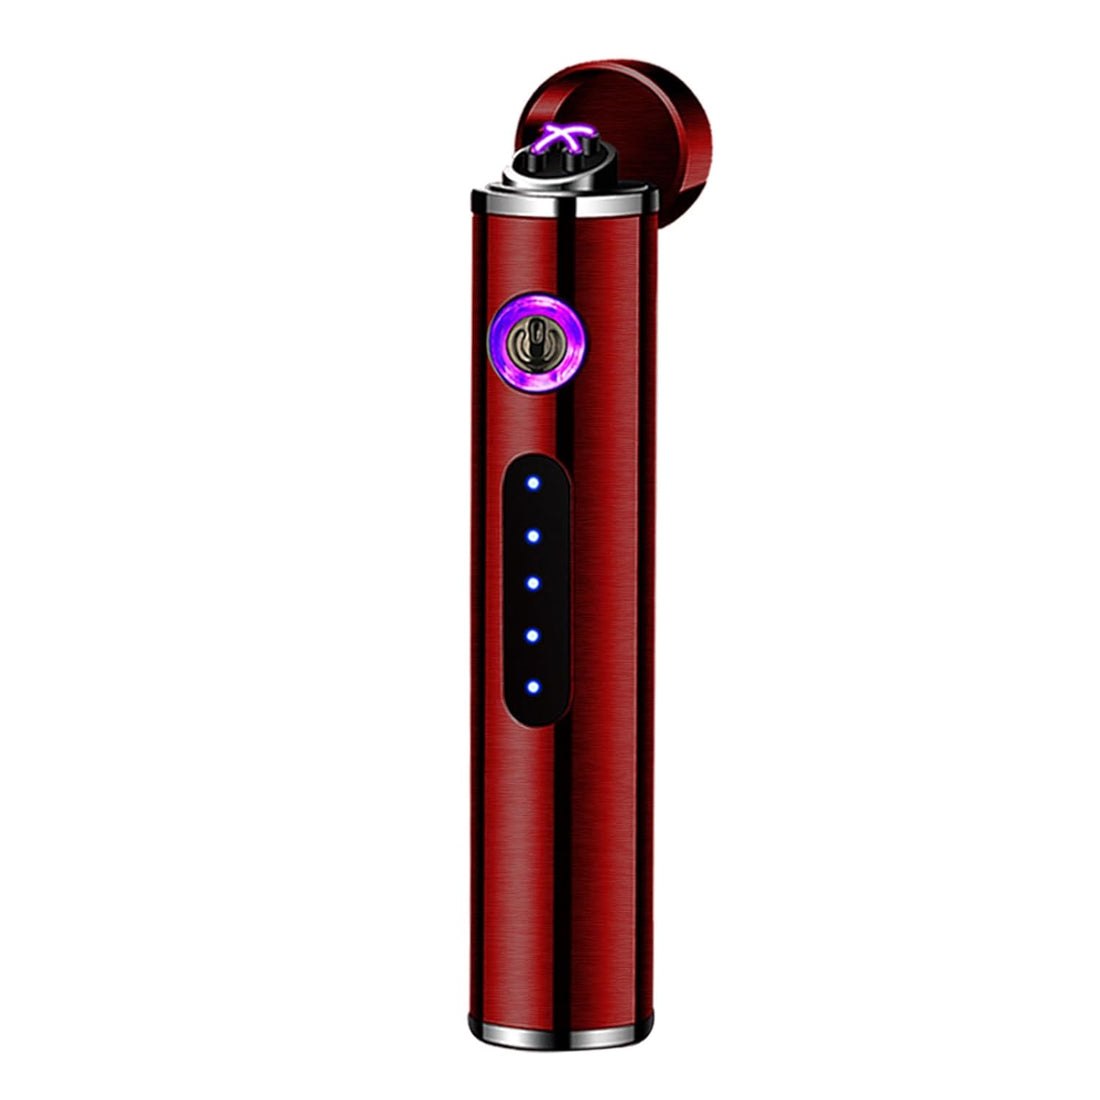 YOZWOO Mini Electric Lighter, Cylindrical Plasma Arc Lighter, USB Electronic Charging Lighter, Touch Ignition Lighter as a Gift.(Brushed Red)